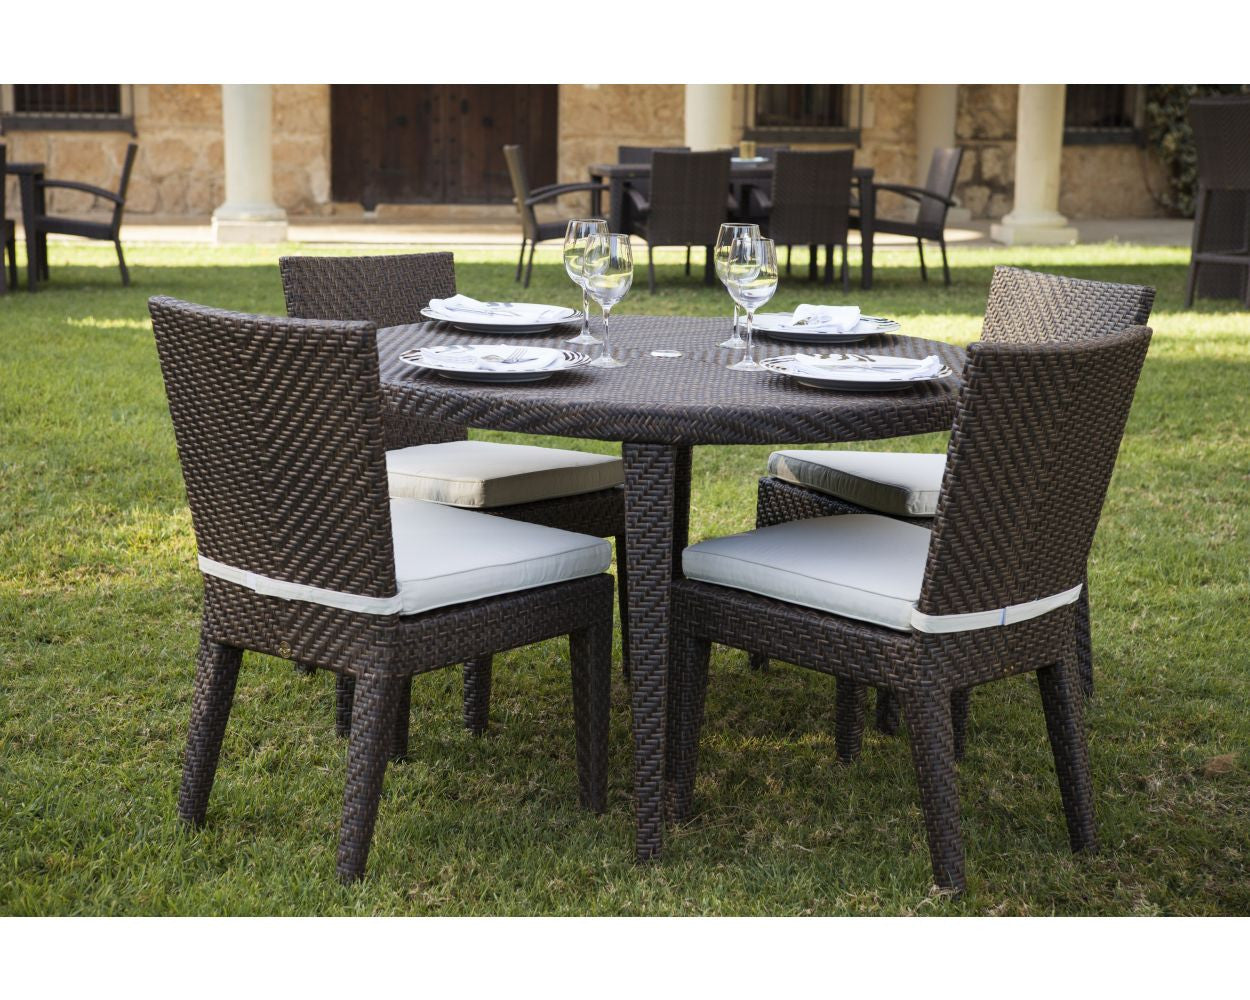 Hospitality Rattan Soho 5 PC Round Dining Side Chair Group with Cushions